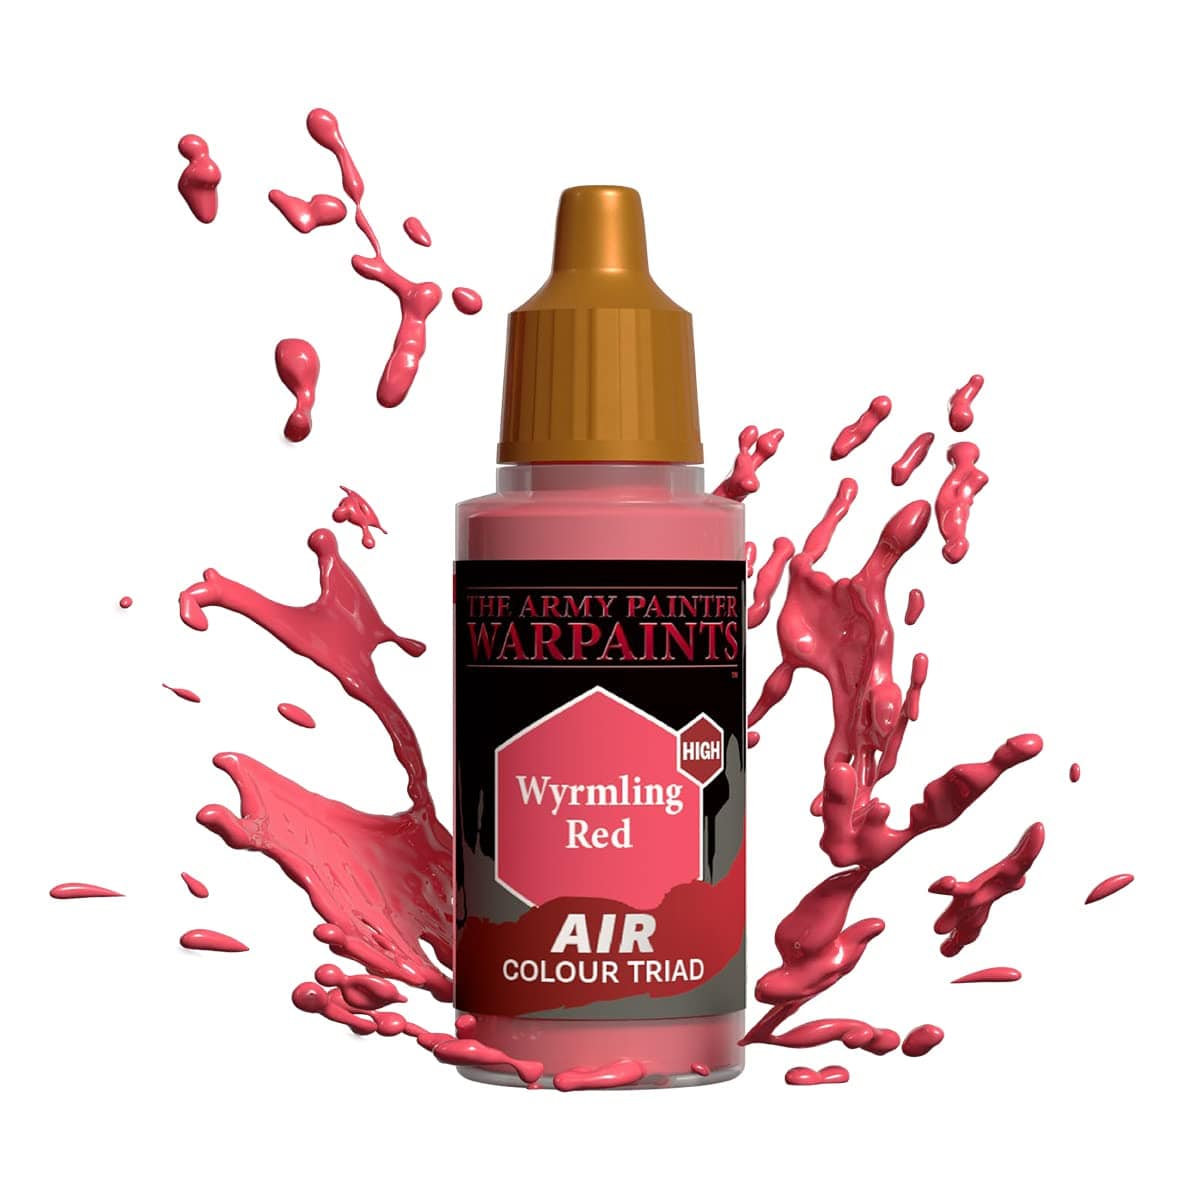 The Army Painter Accessories The Army Painter Warpaints Air: Wyrmling Red 18ml